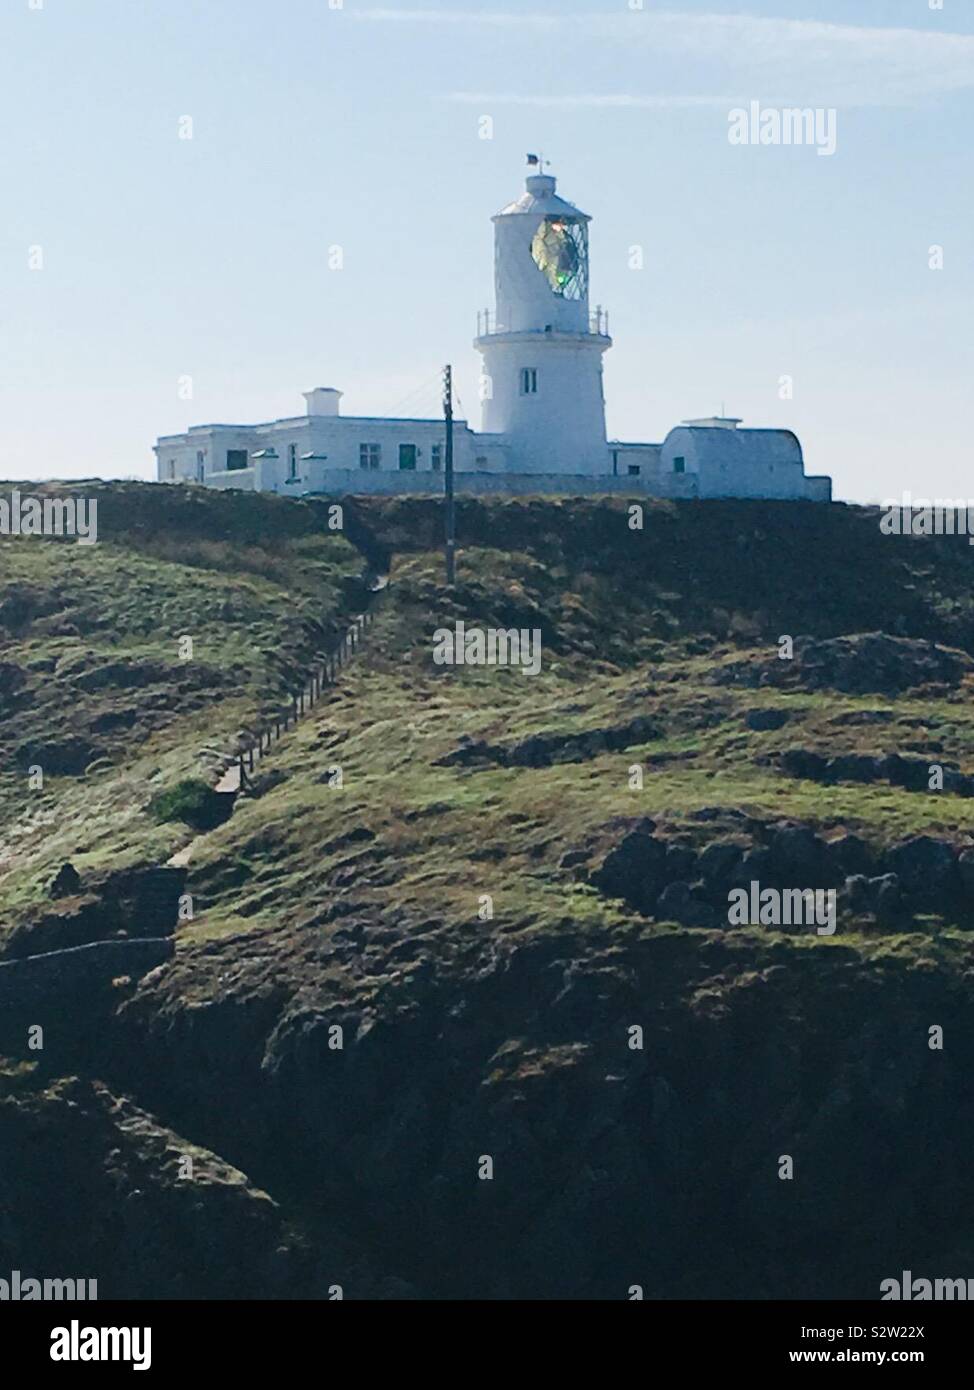 Strumble Head Lighthouse in Pembrokeshire, West Wales, Regno Unito Foto Stock